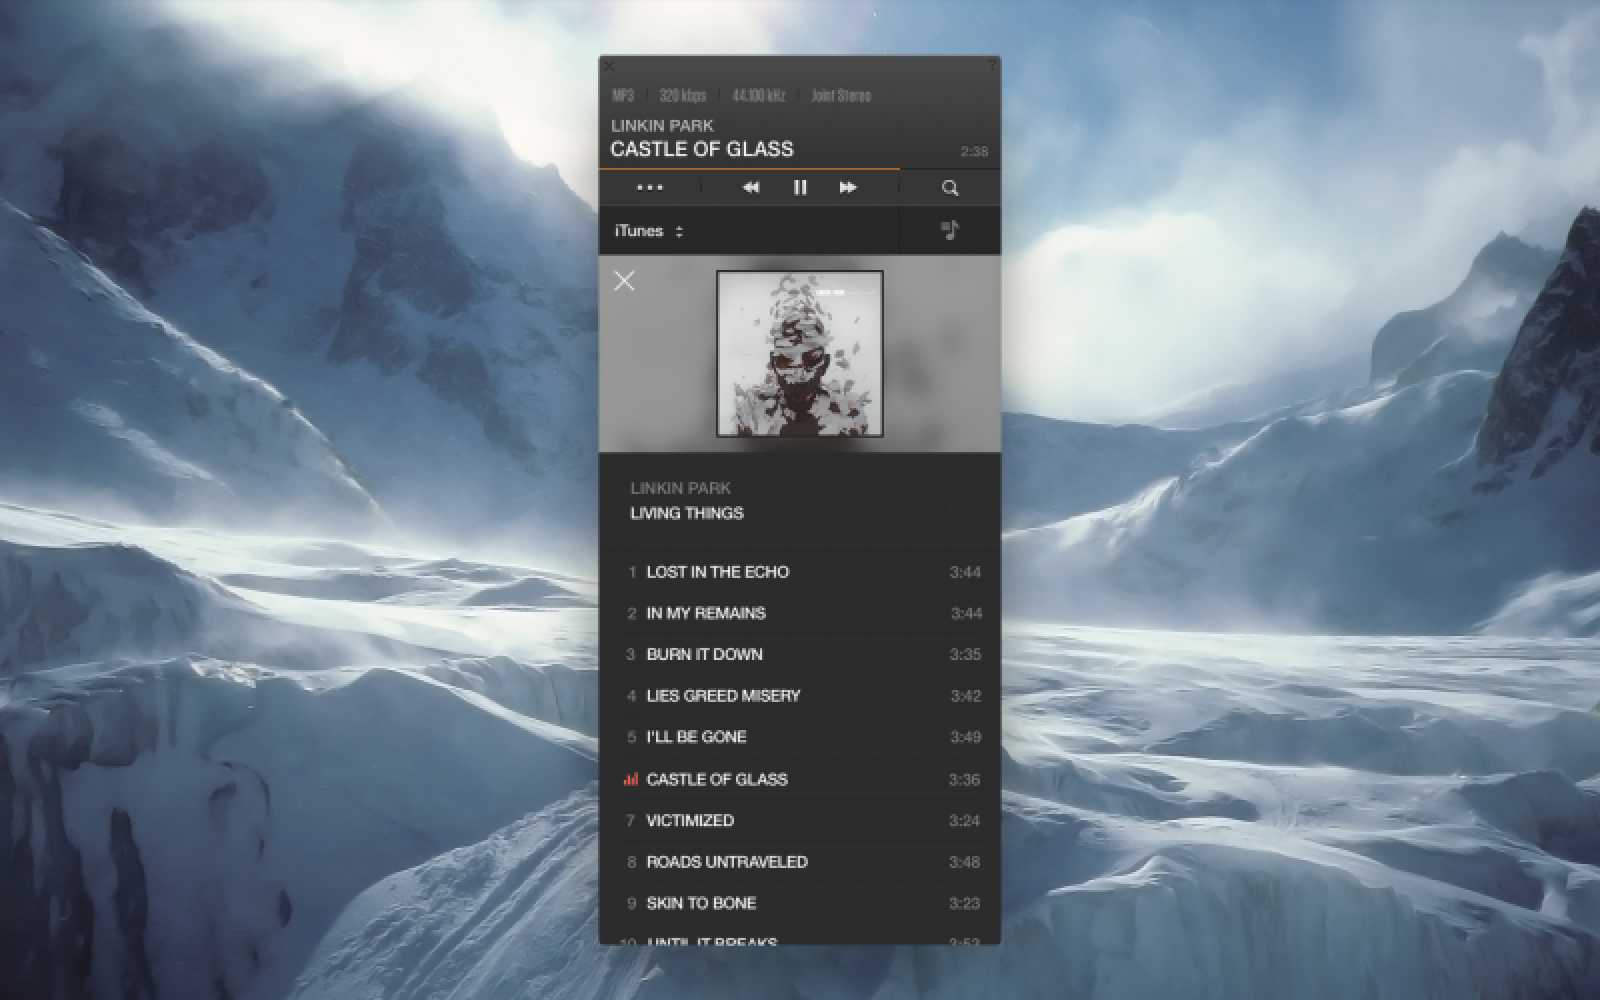 download vox player for mac